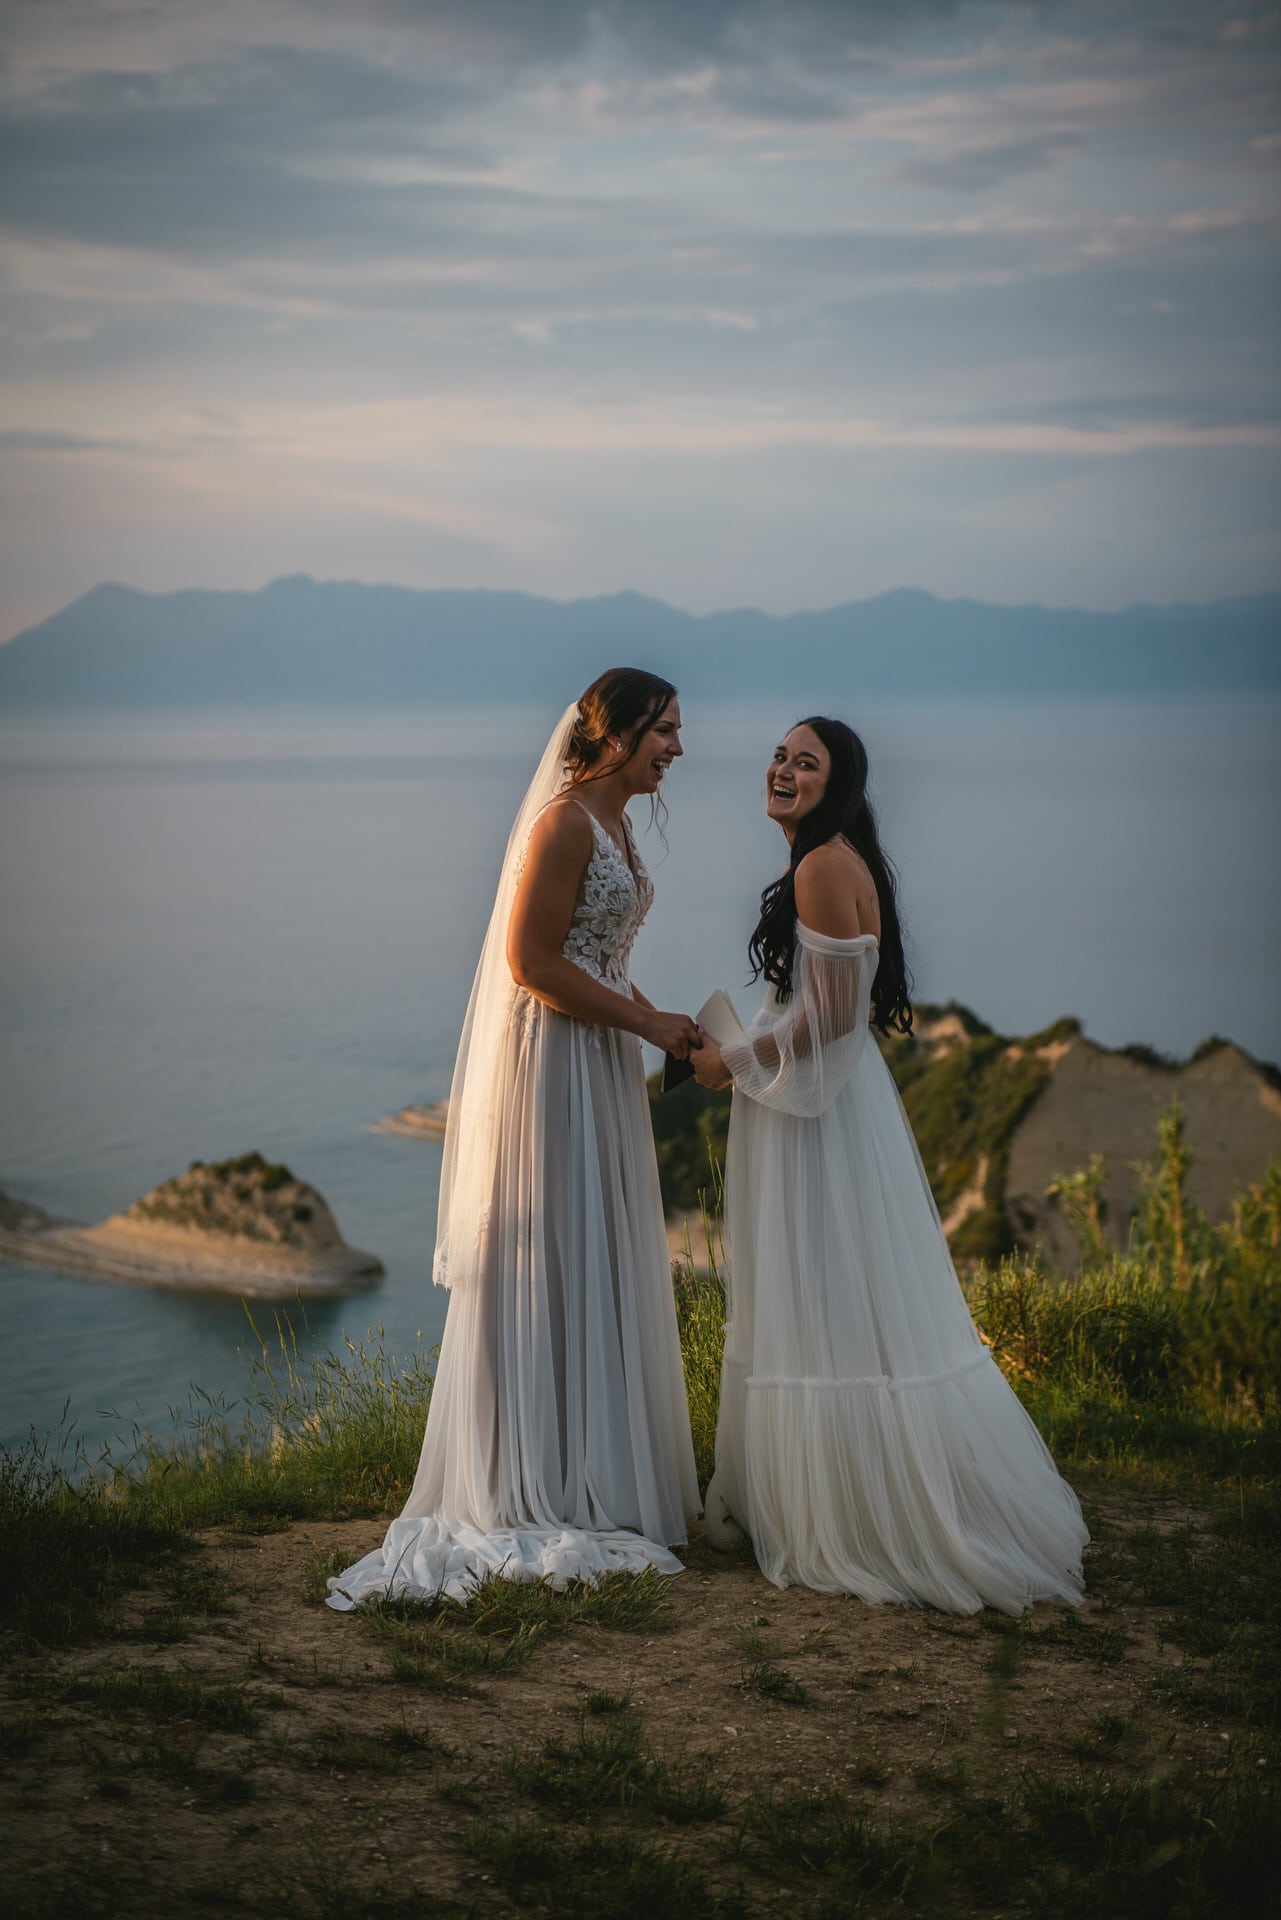 The couple's hands intertwined, exchanging vows in their Corfu elopement.